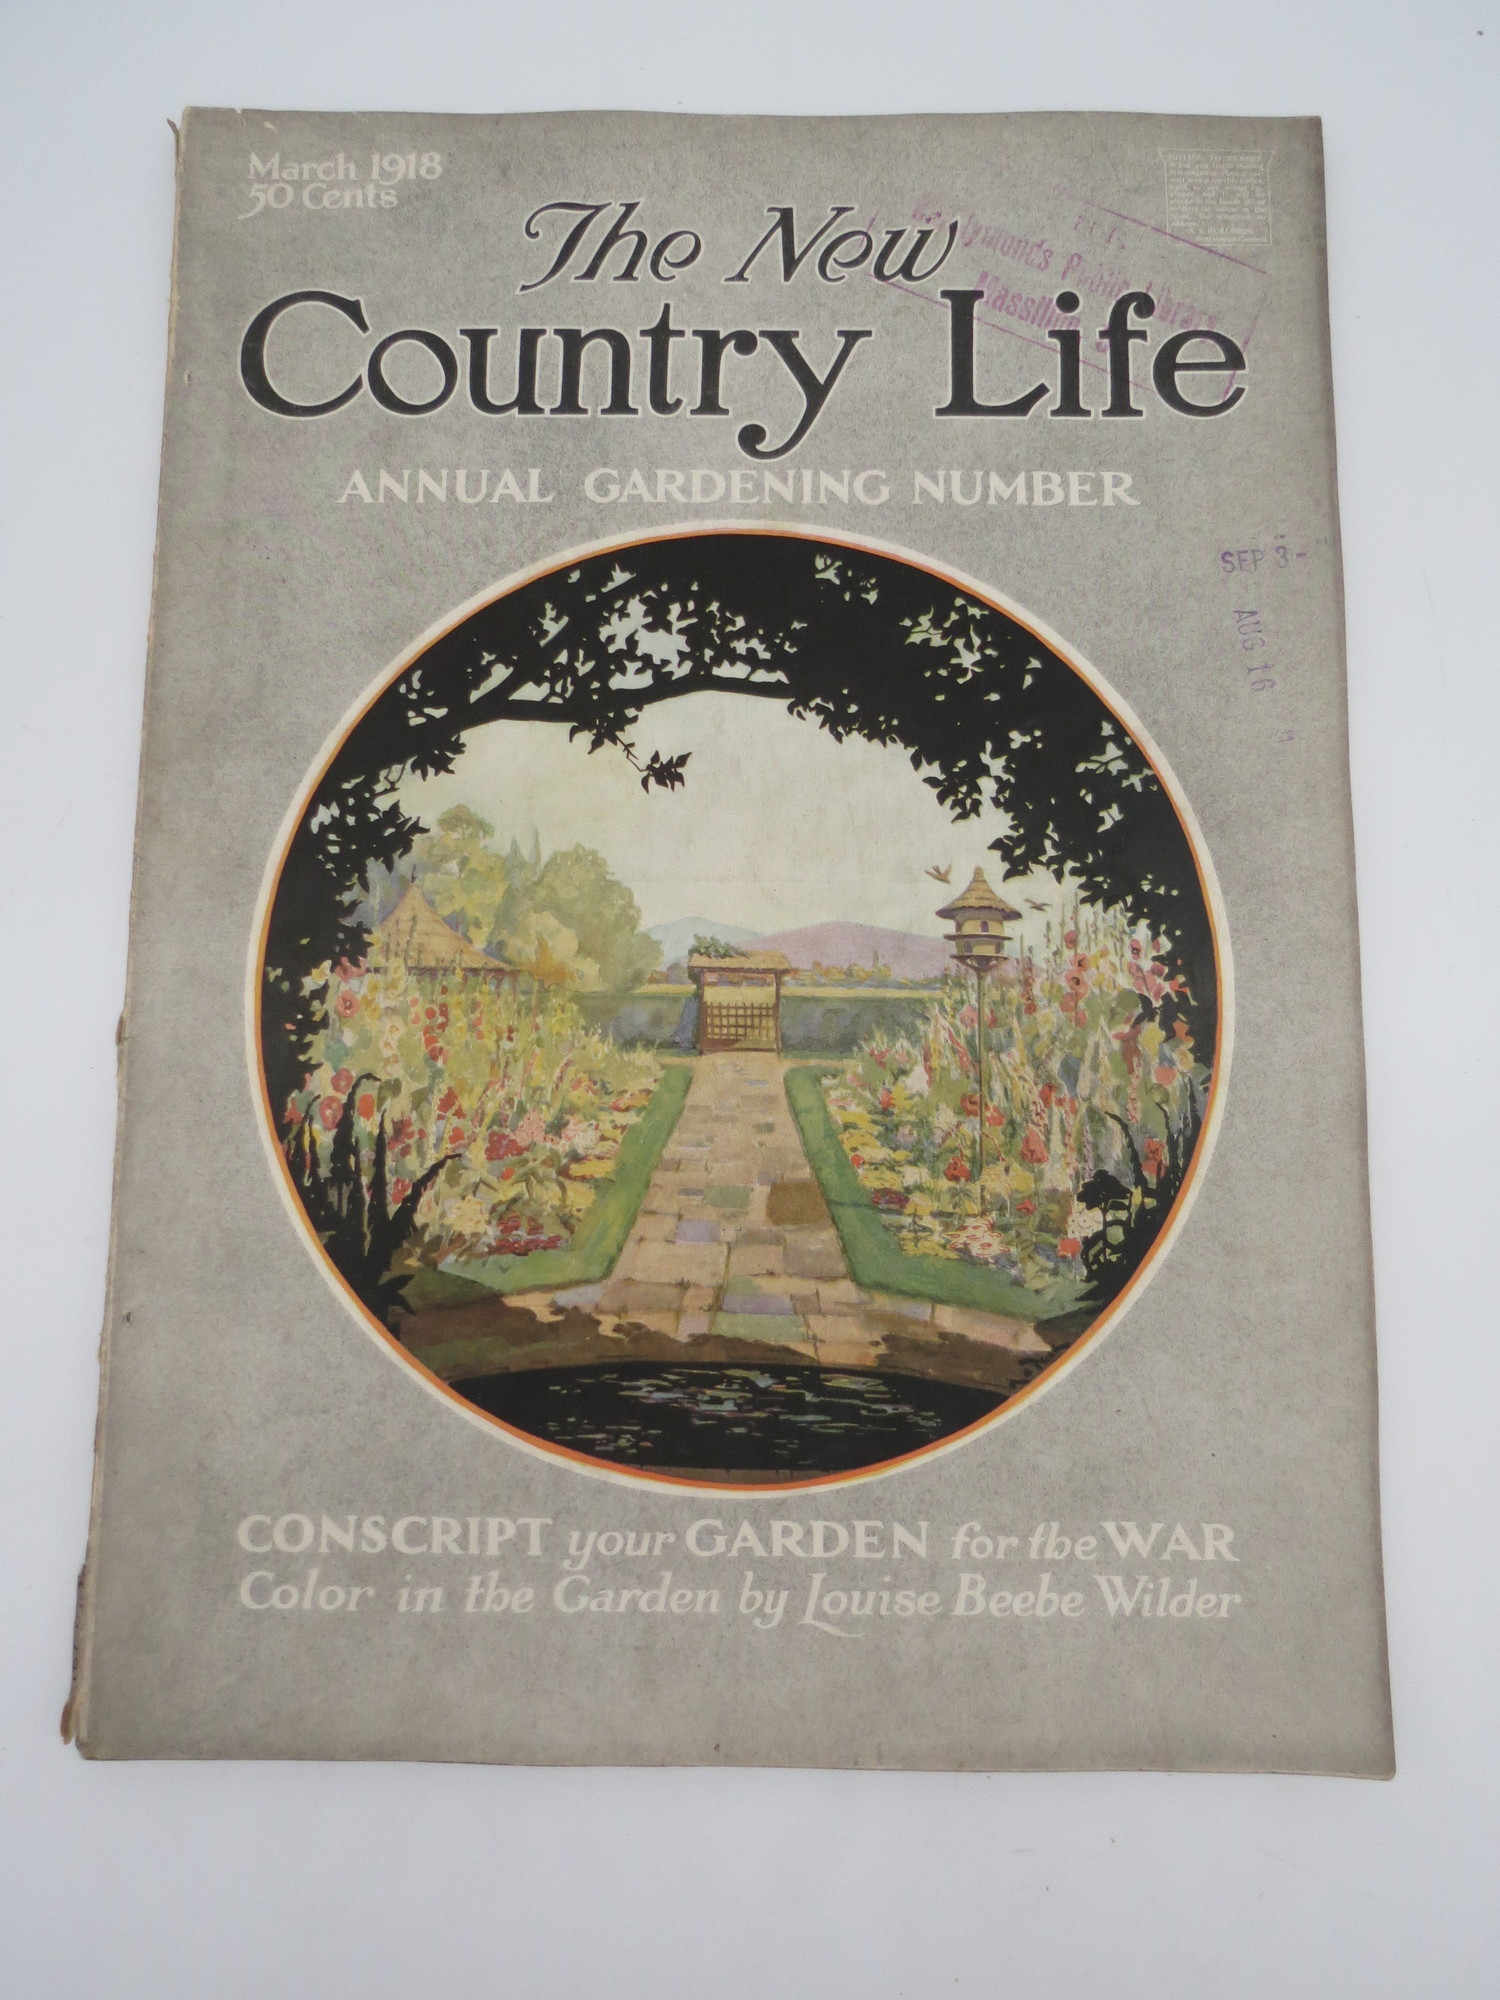 Image for THE NEW COUNTRY LIFE MAGAZINE, MARCH 1918 (CONSCRIPT YOUR GARDEN FOR THE WAR)